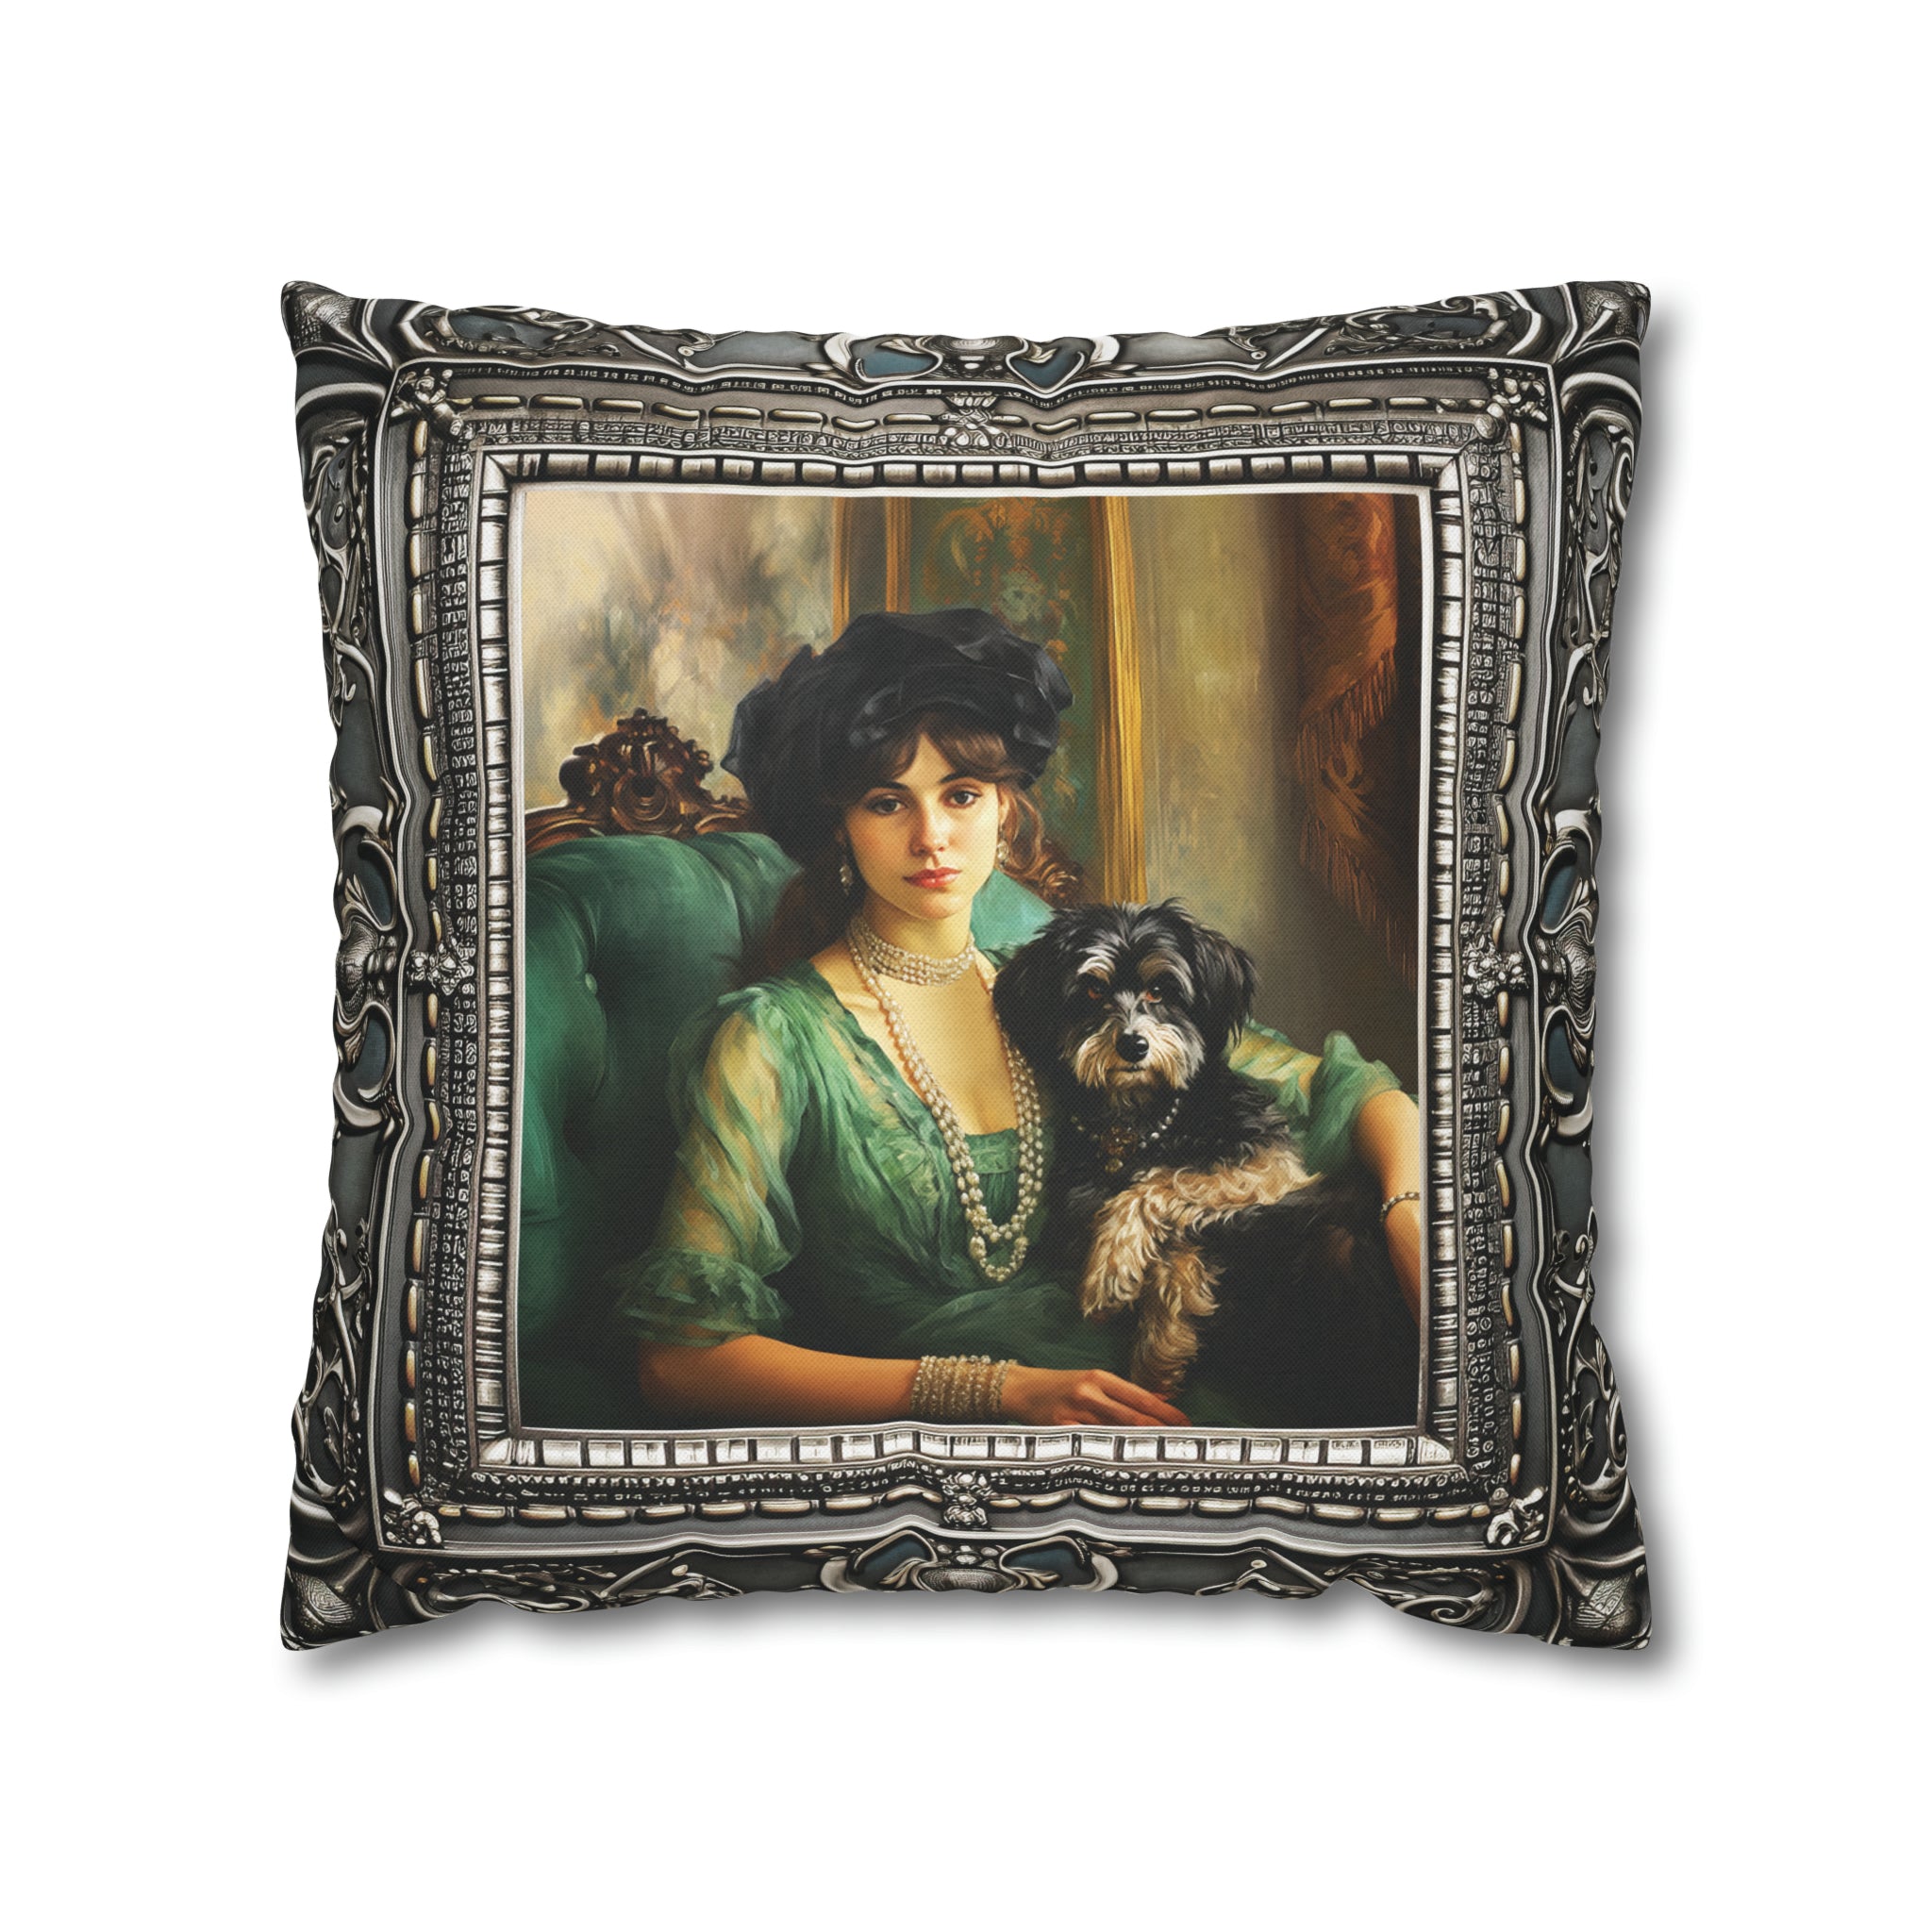 Square Pillow Case 18" x 18", CASE ONLY, no pillow form, original Art , a French Woman and her Dog in an Antique Frame